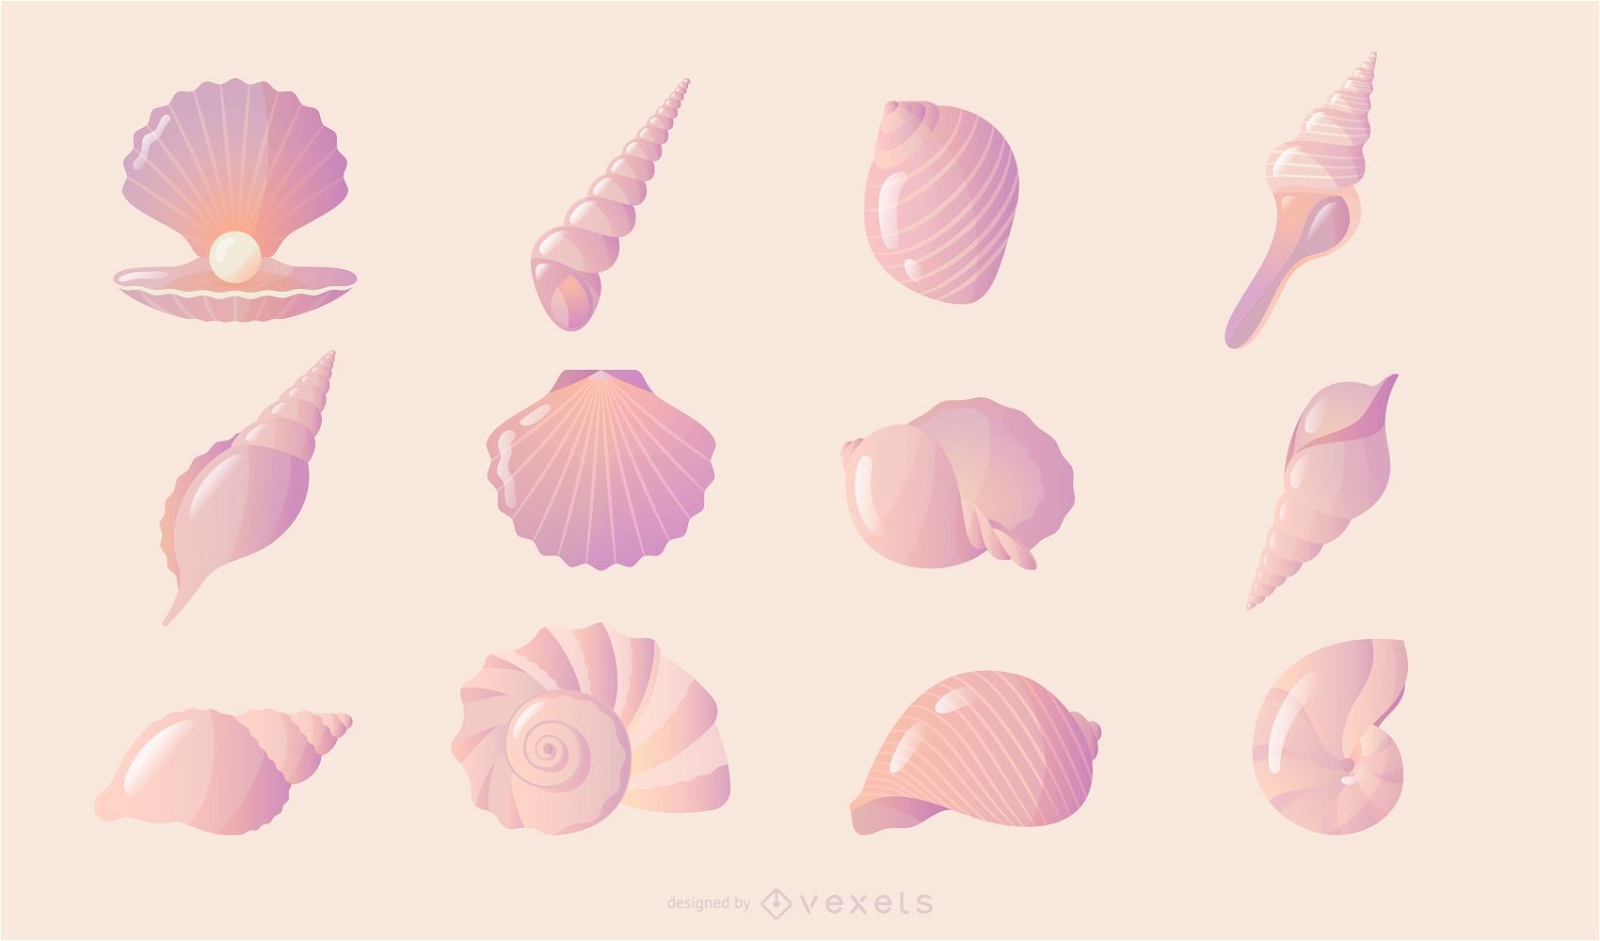 Seashell gradient collection